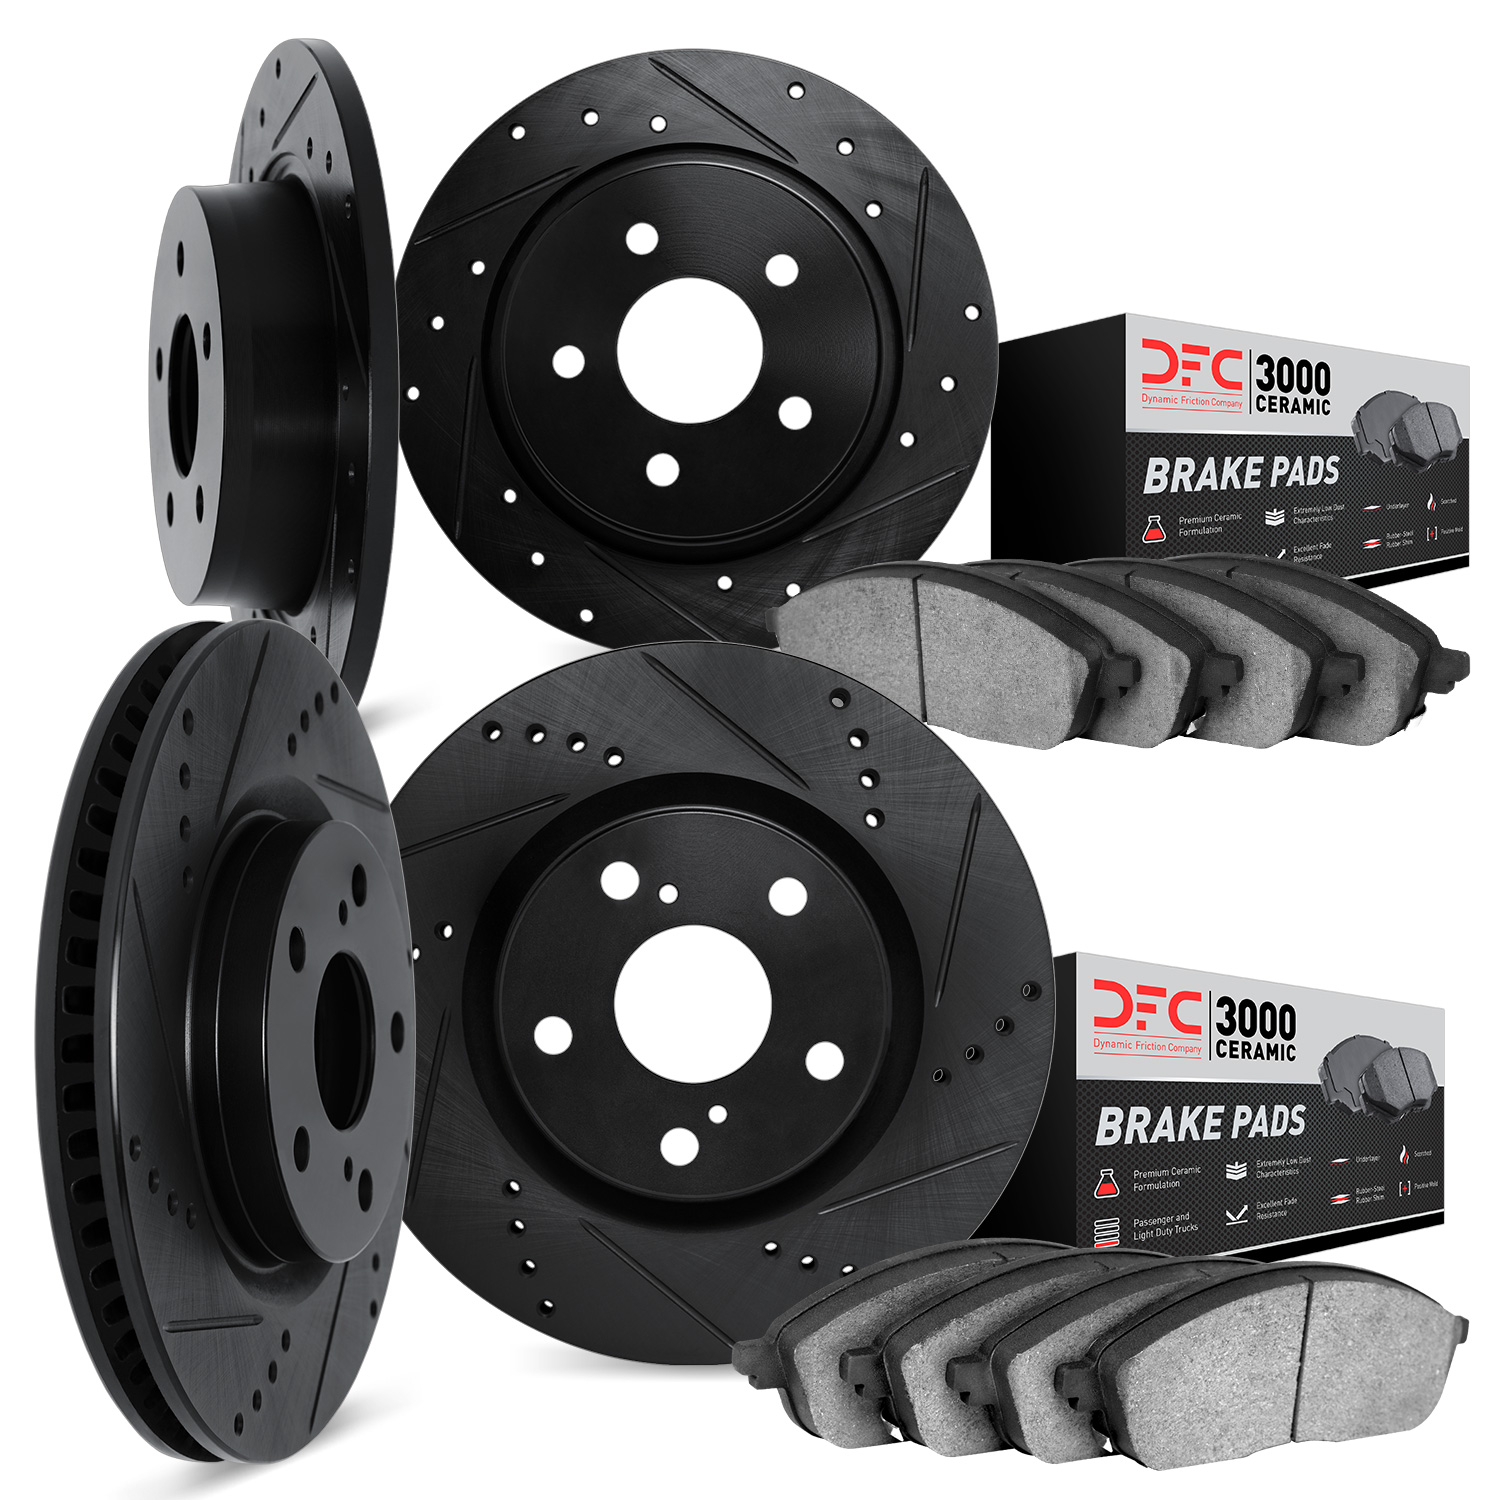 8304-39014 Drilled/Slotted Brake Rotors with 3000-Series Ceramic Brake Pads Kit [Black], Fits Select Mitsubishi, Position: Front